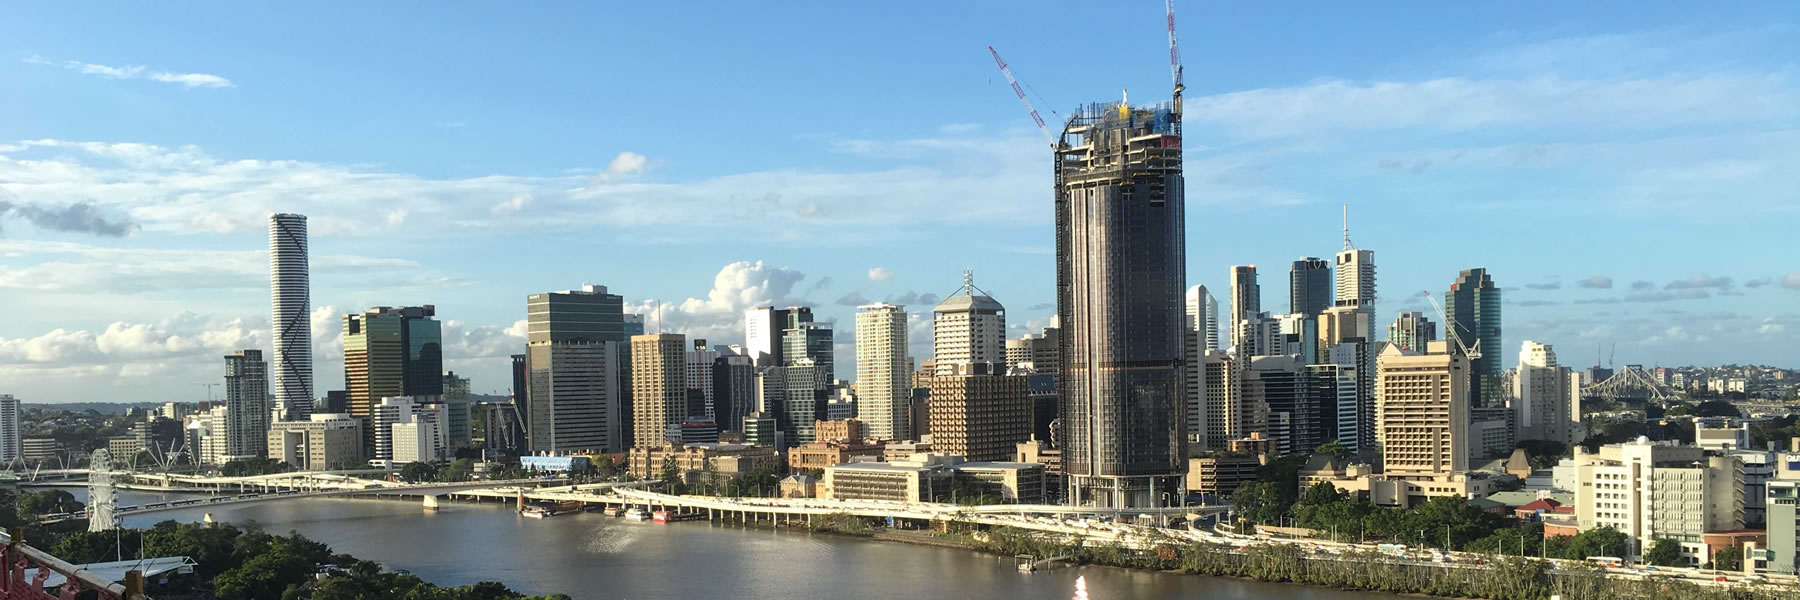 View of the Brisbane River from the new Flight Centre Tower